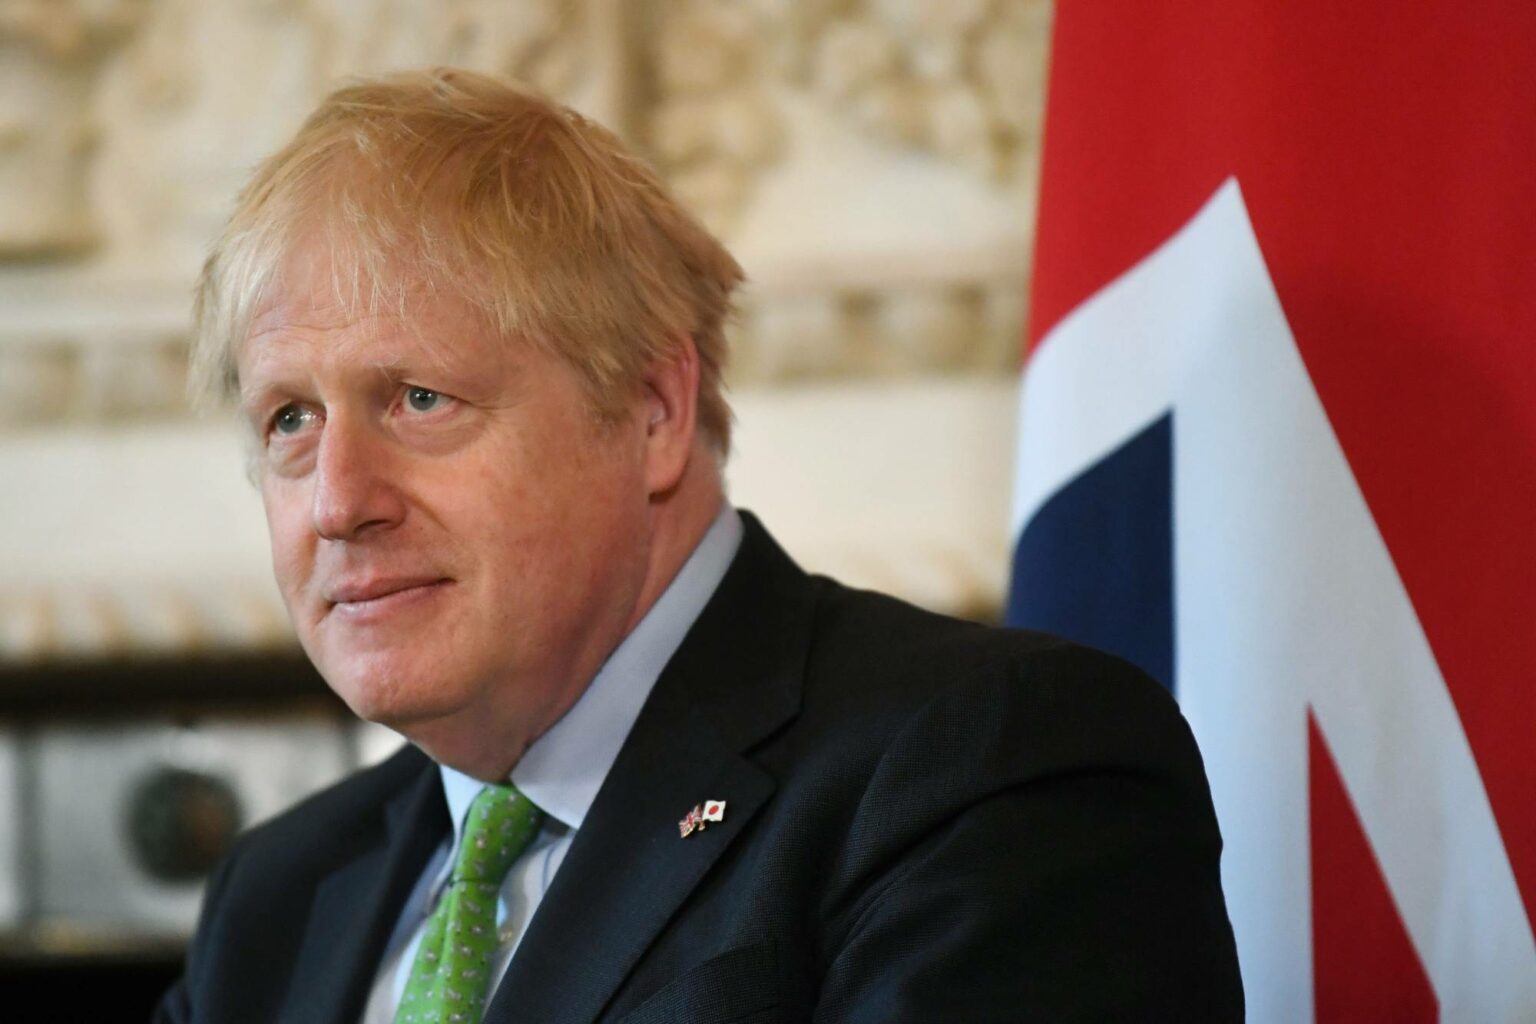 Boris Johnson faces new threat of confidence vote over 'partygate'